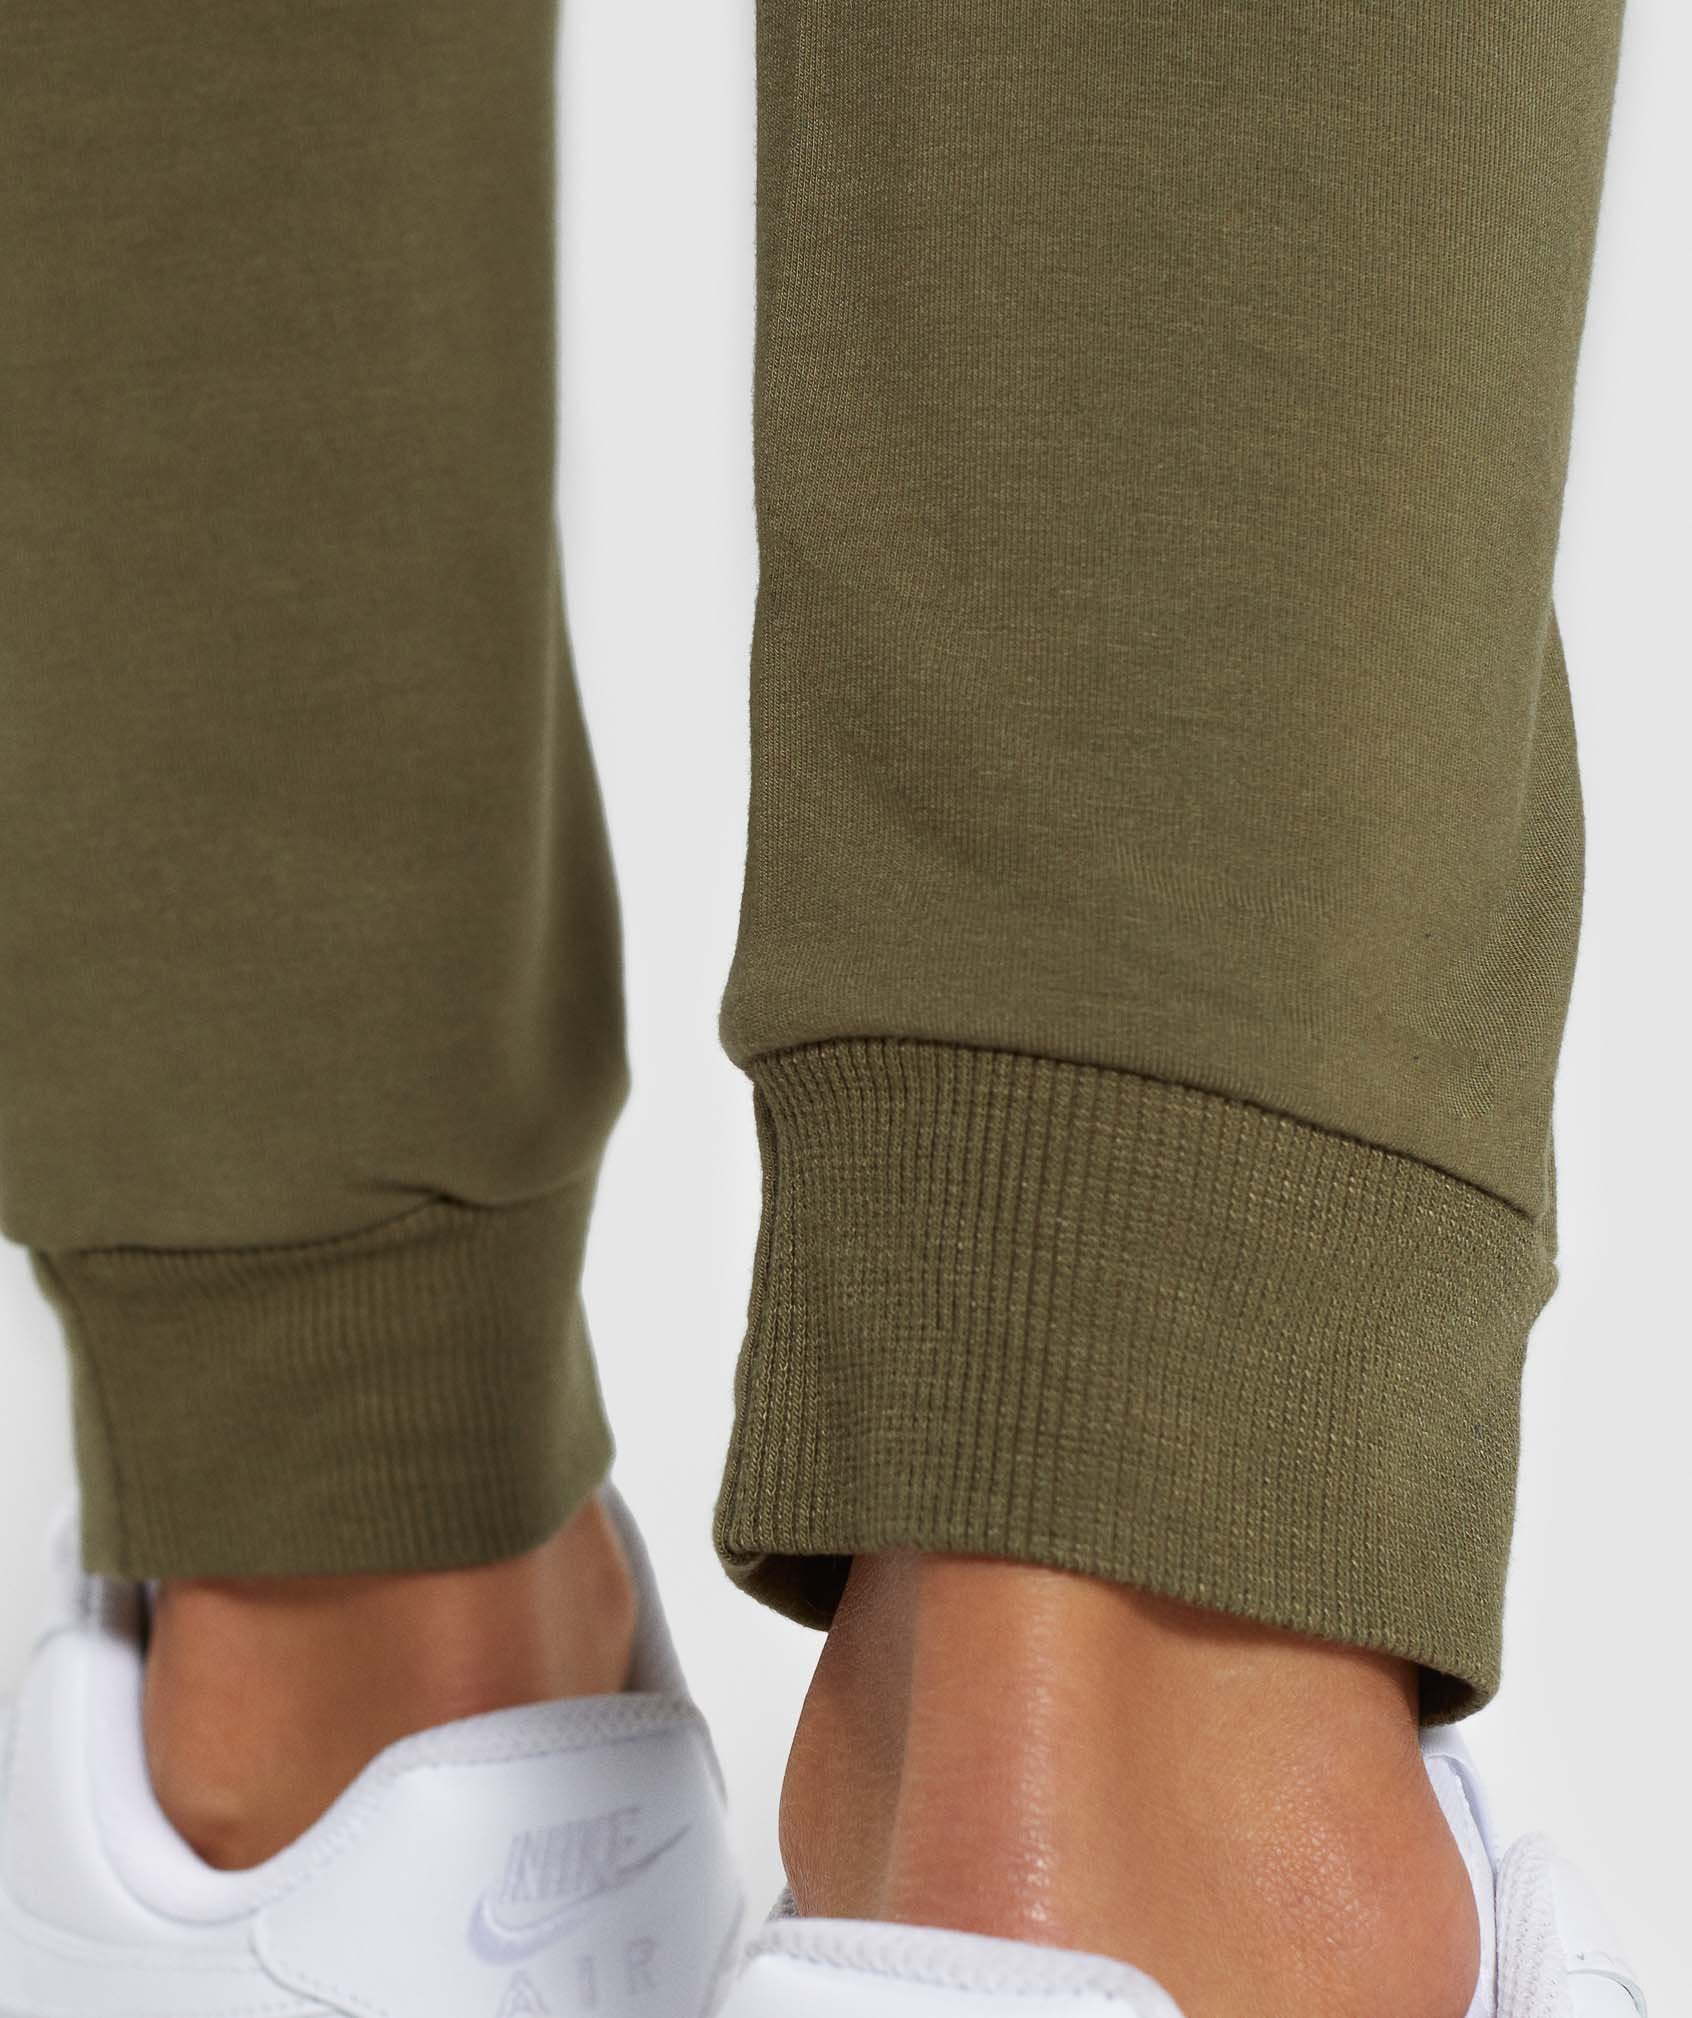 Solace Bottoms in Khaki - view 6